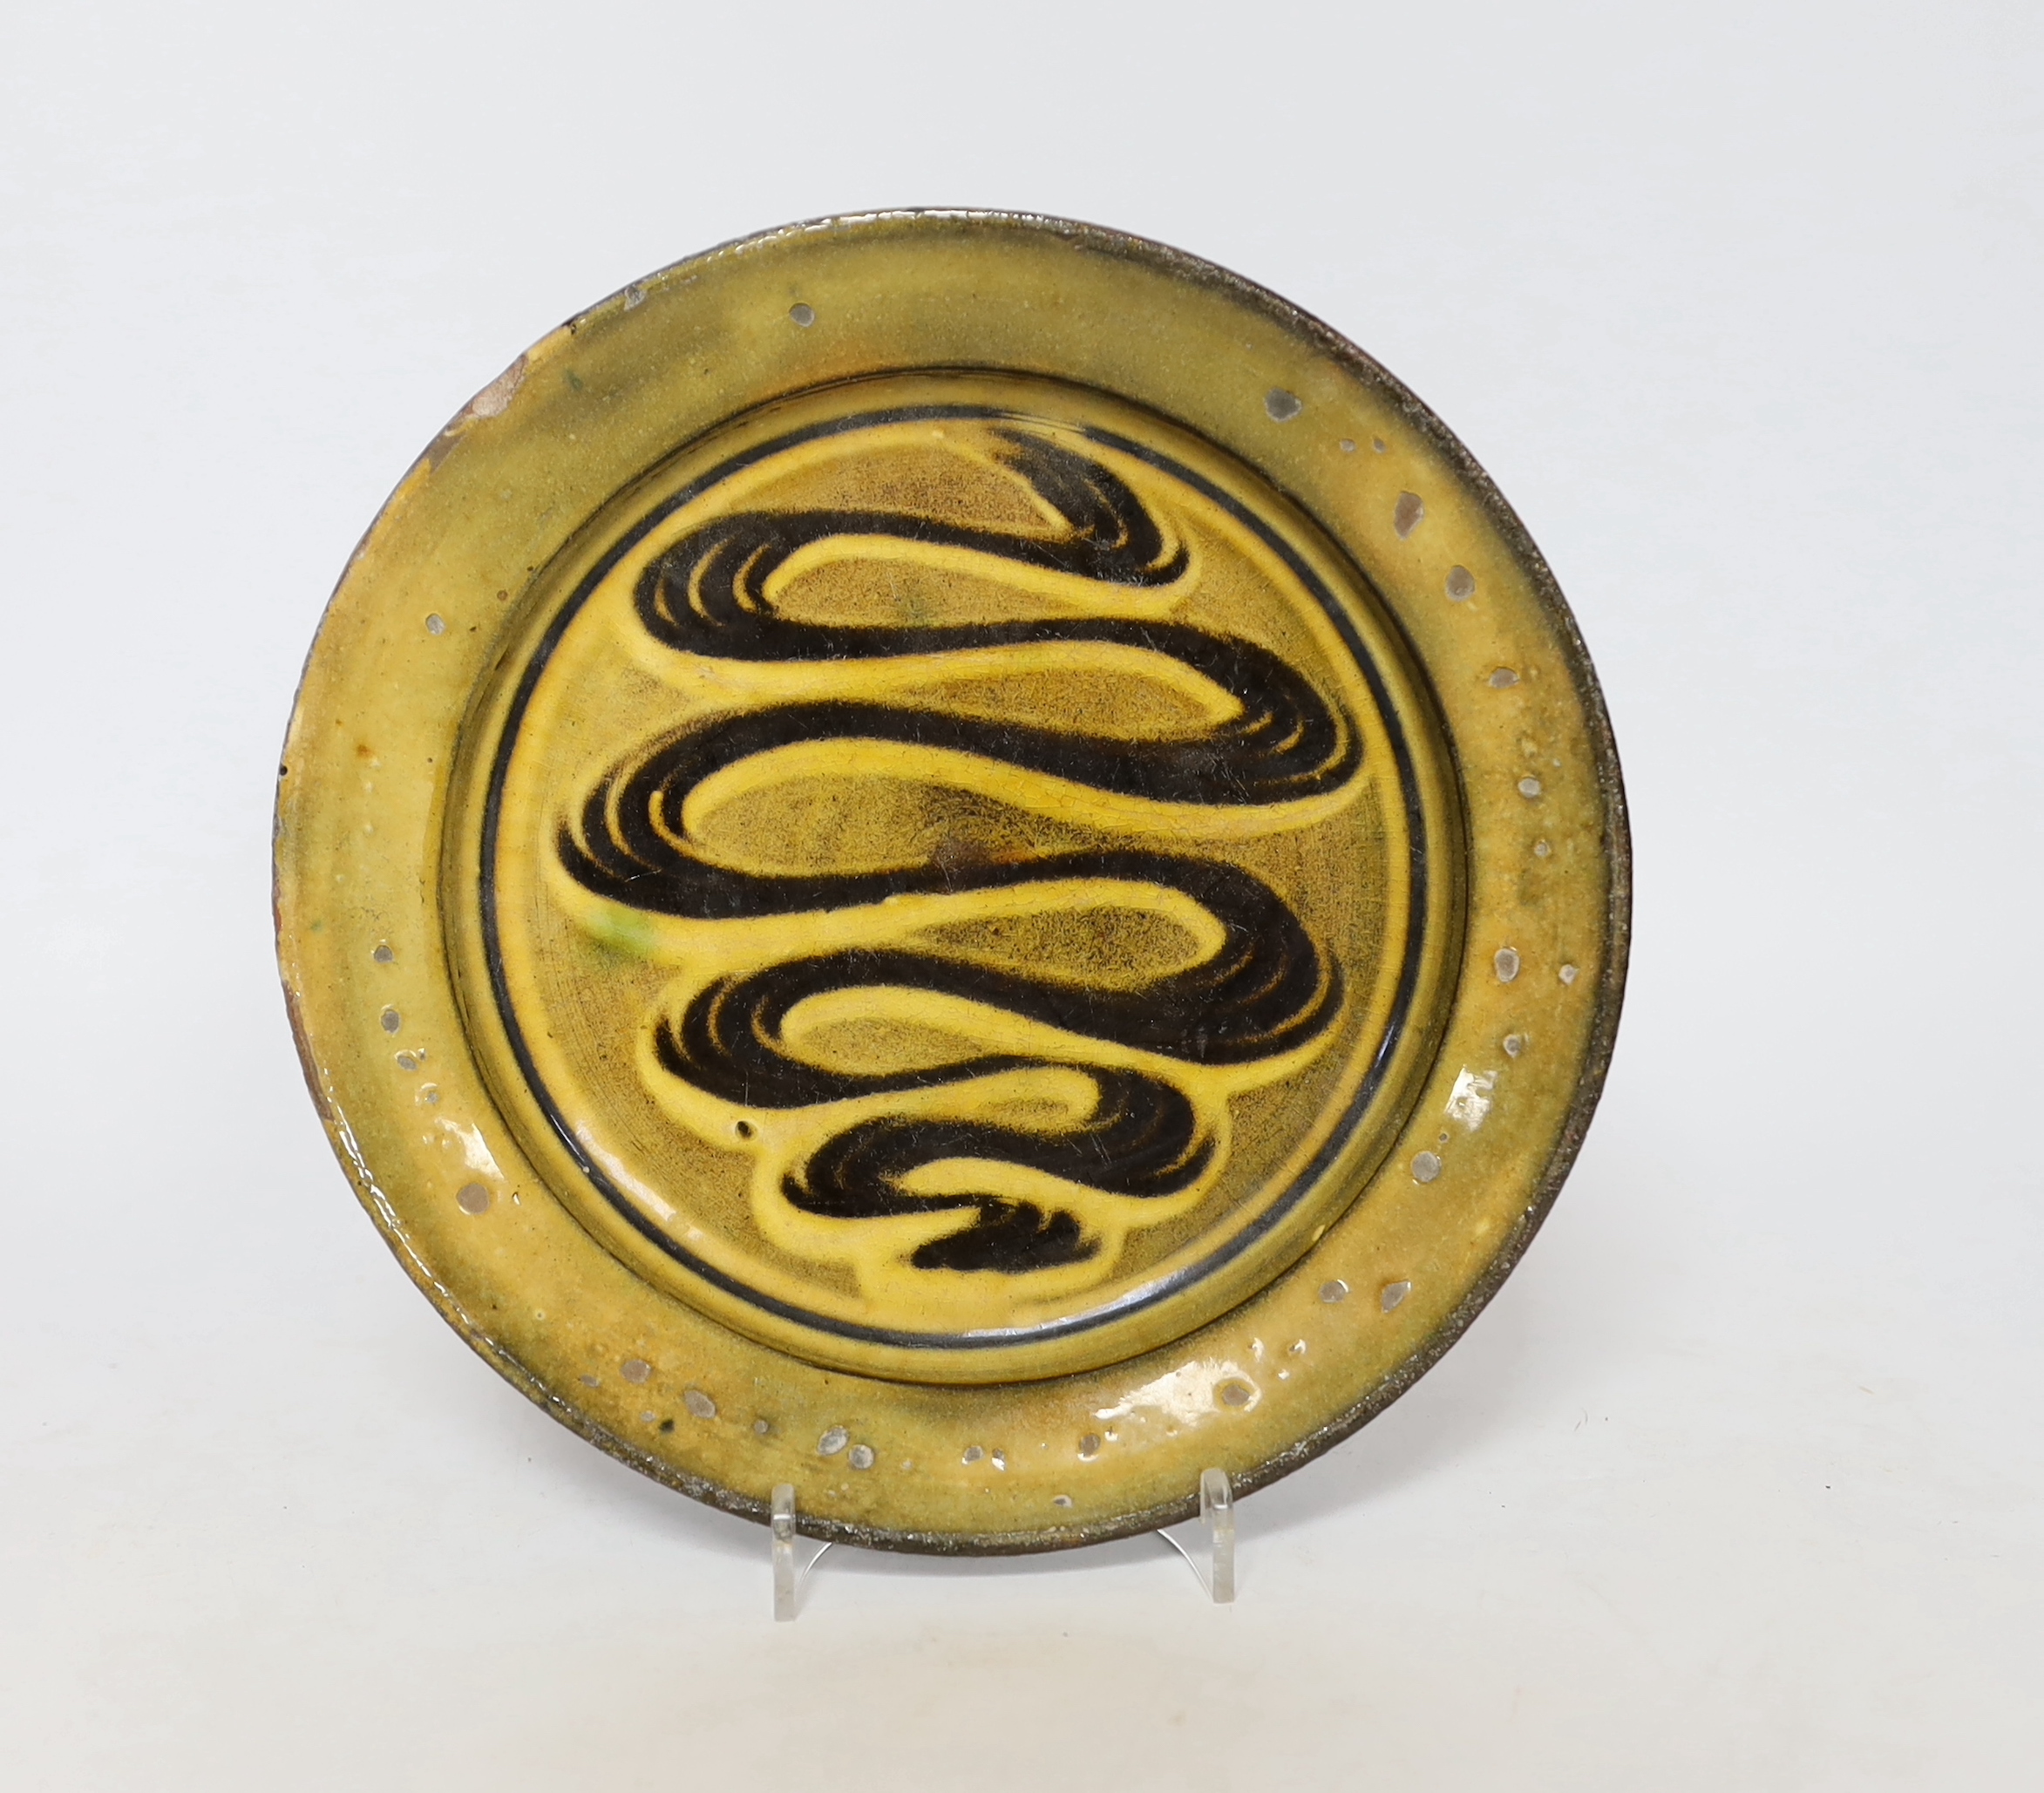 Michael Cardew for Winchcombe pottery, a slip decorated plate, c.1936-45